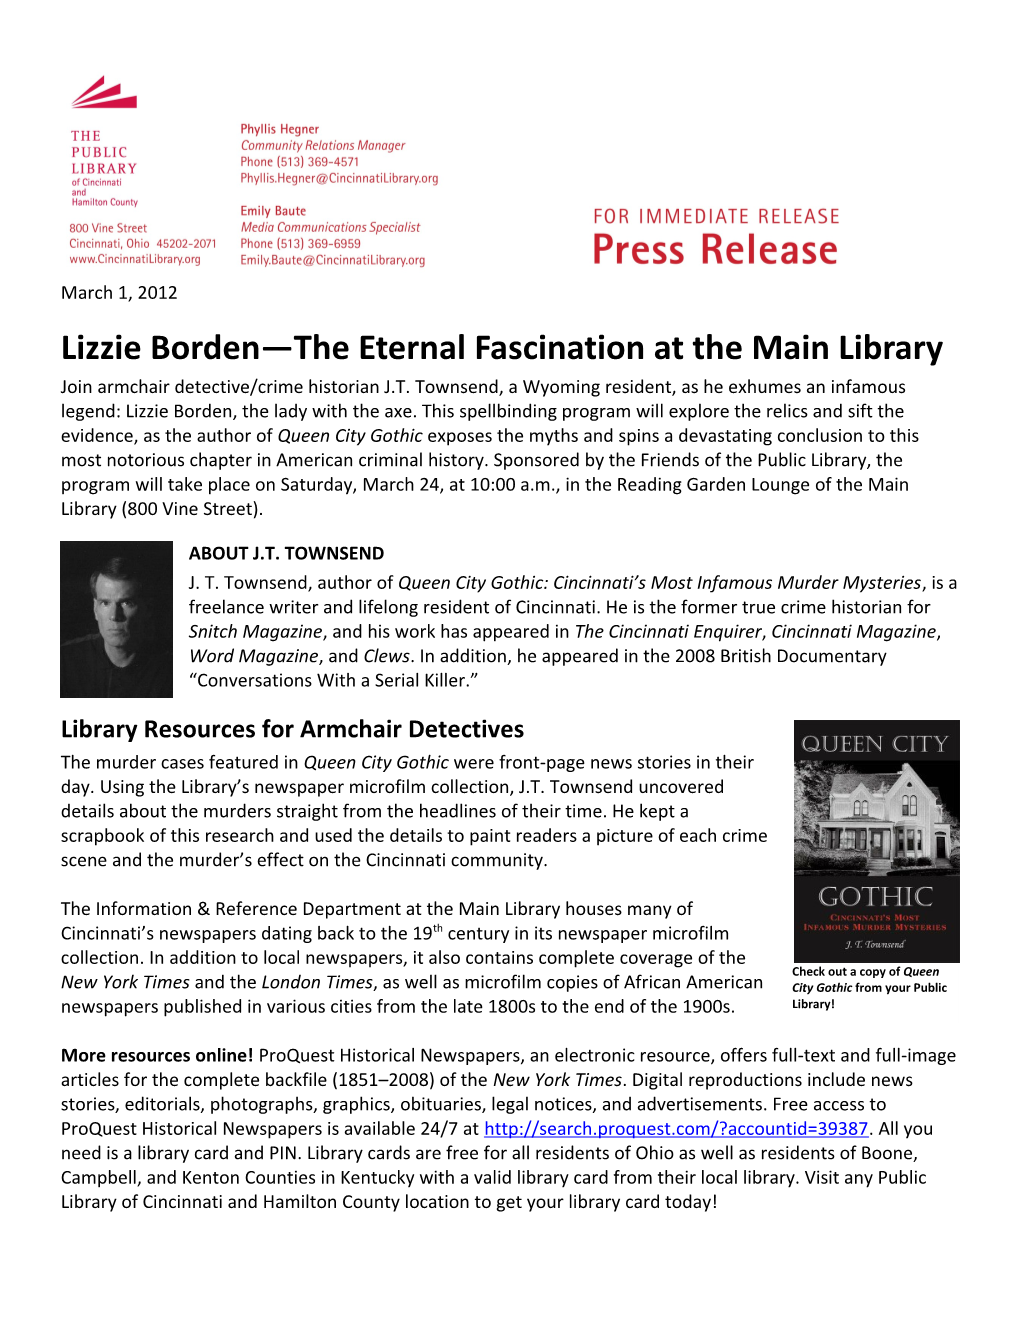 Lizzie Borden the Eternal Fascination at the Main Library